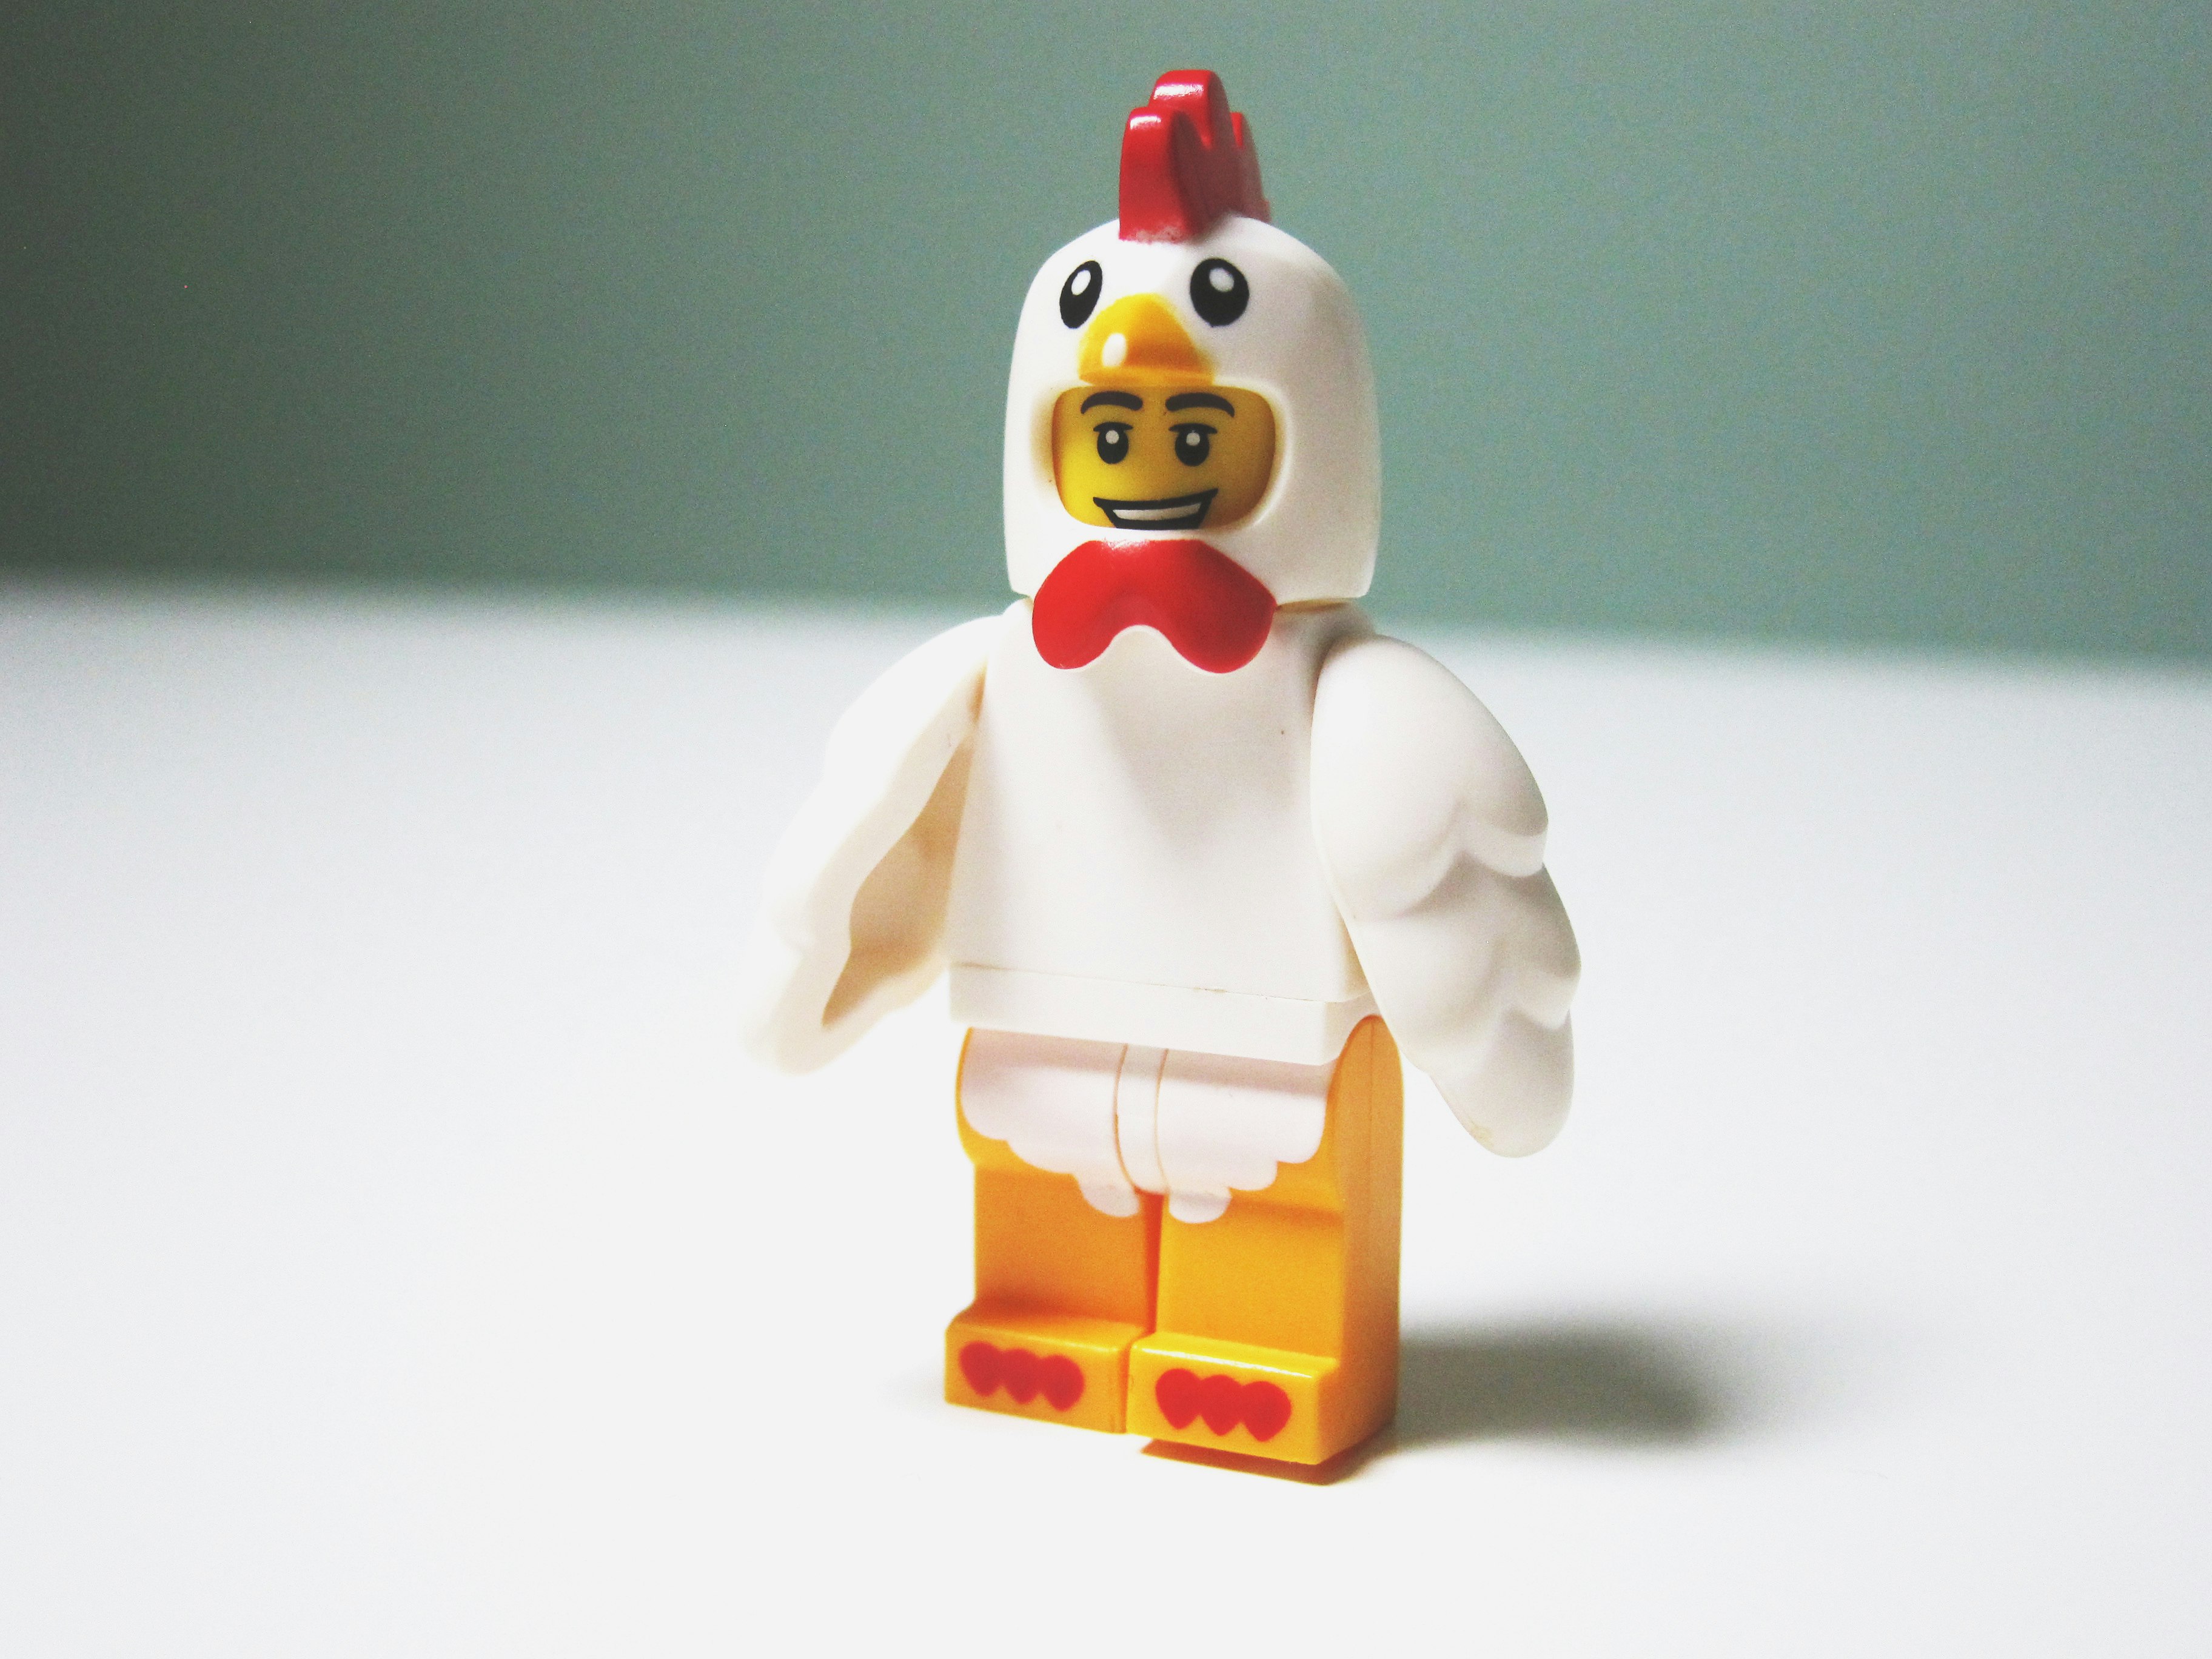 LEGO chicken minifig on table